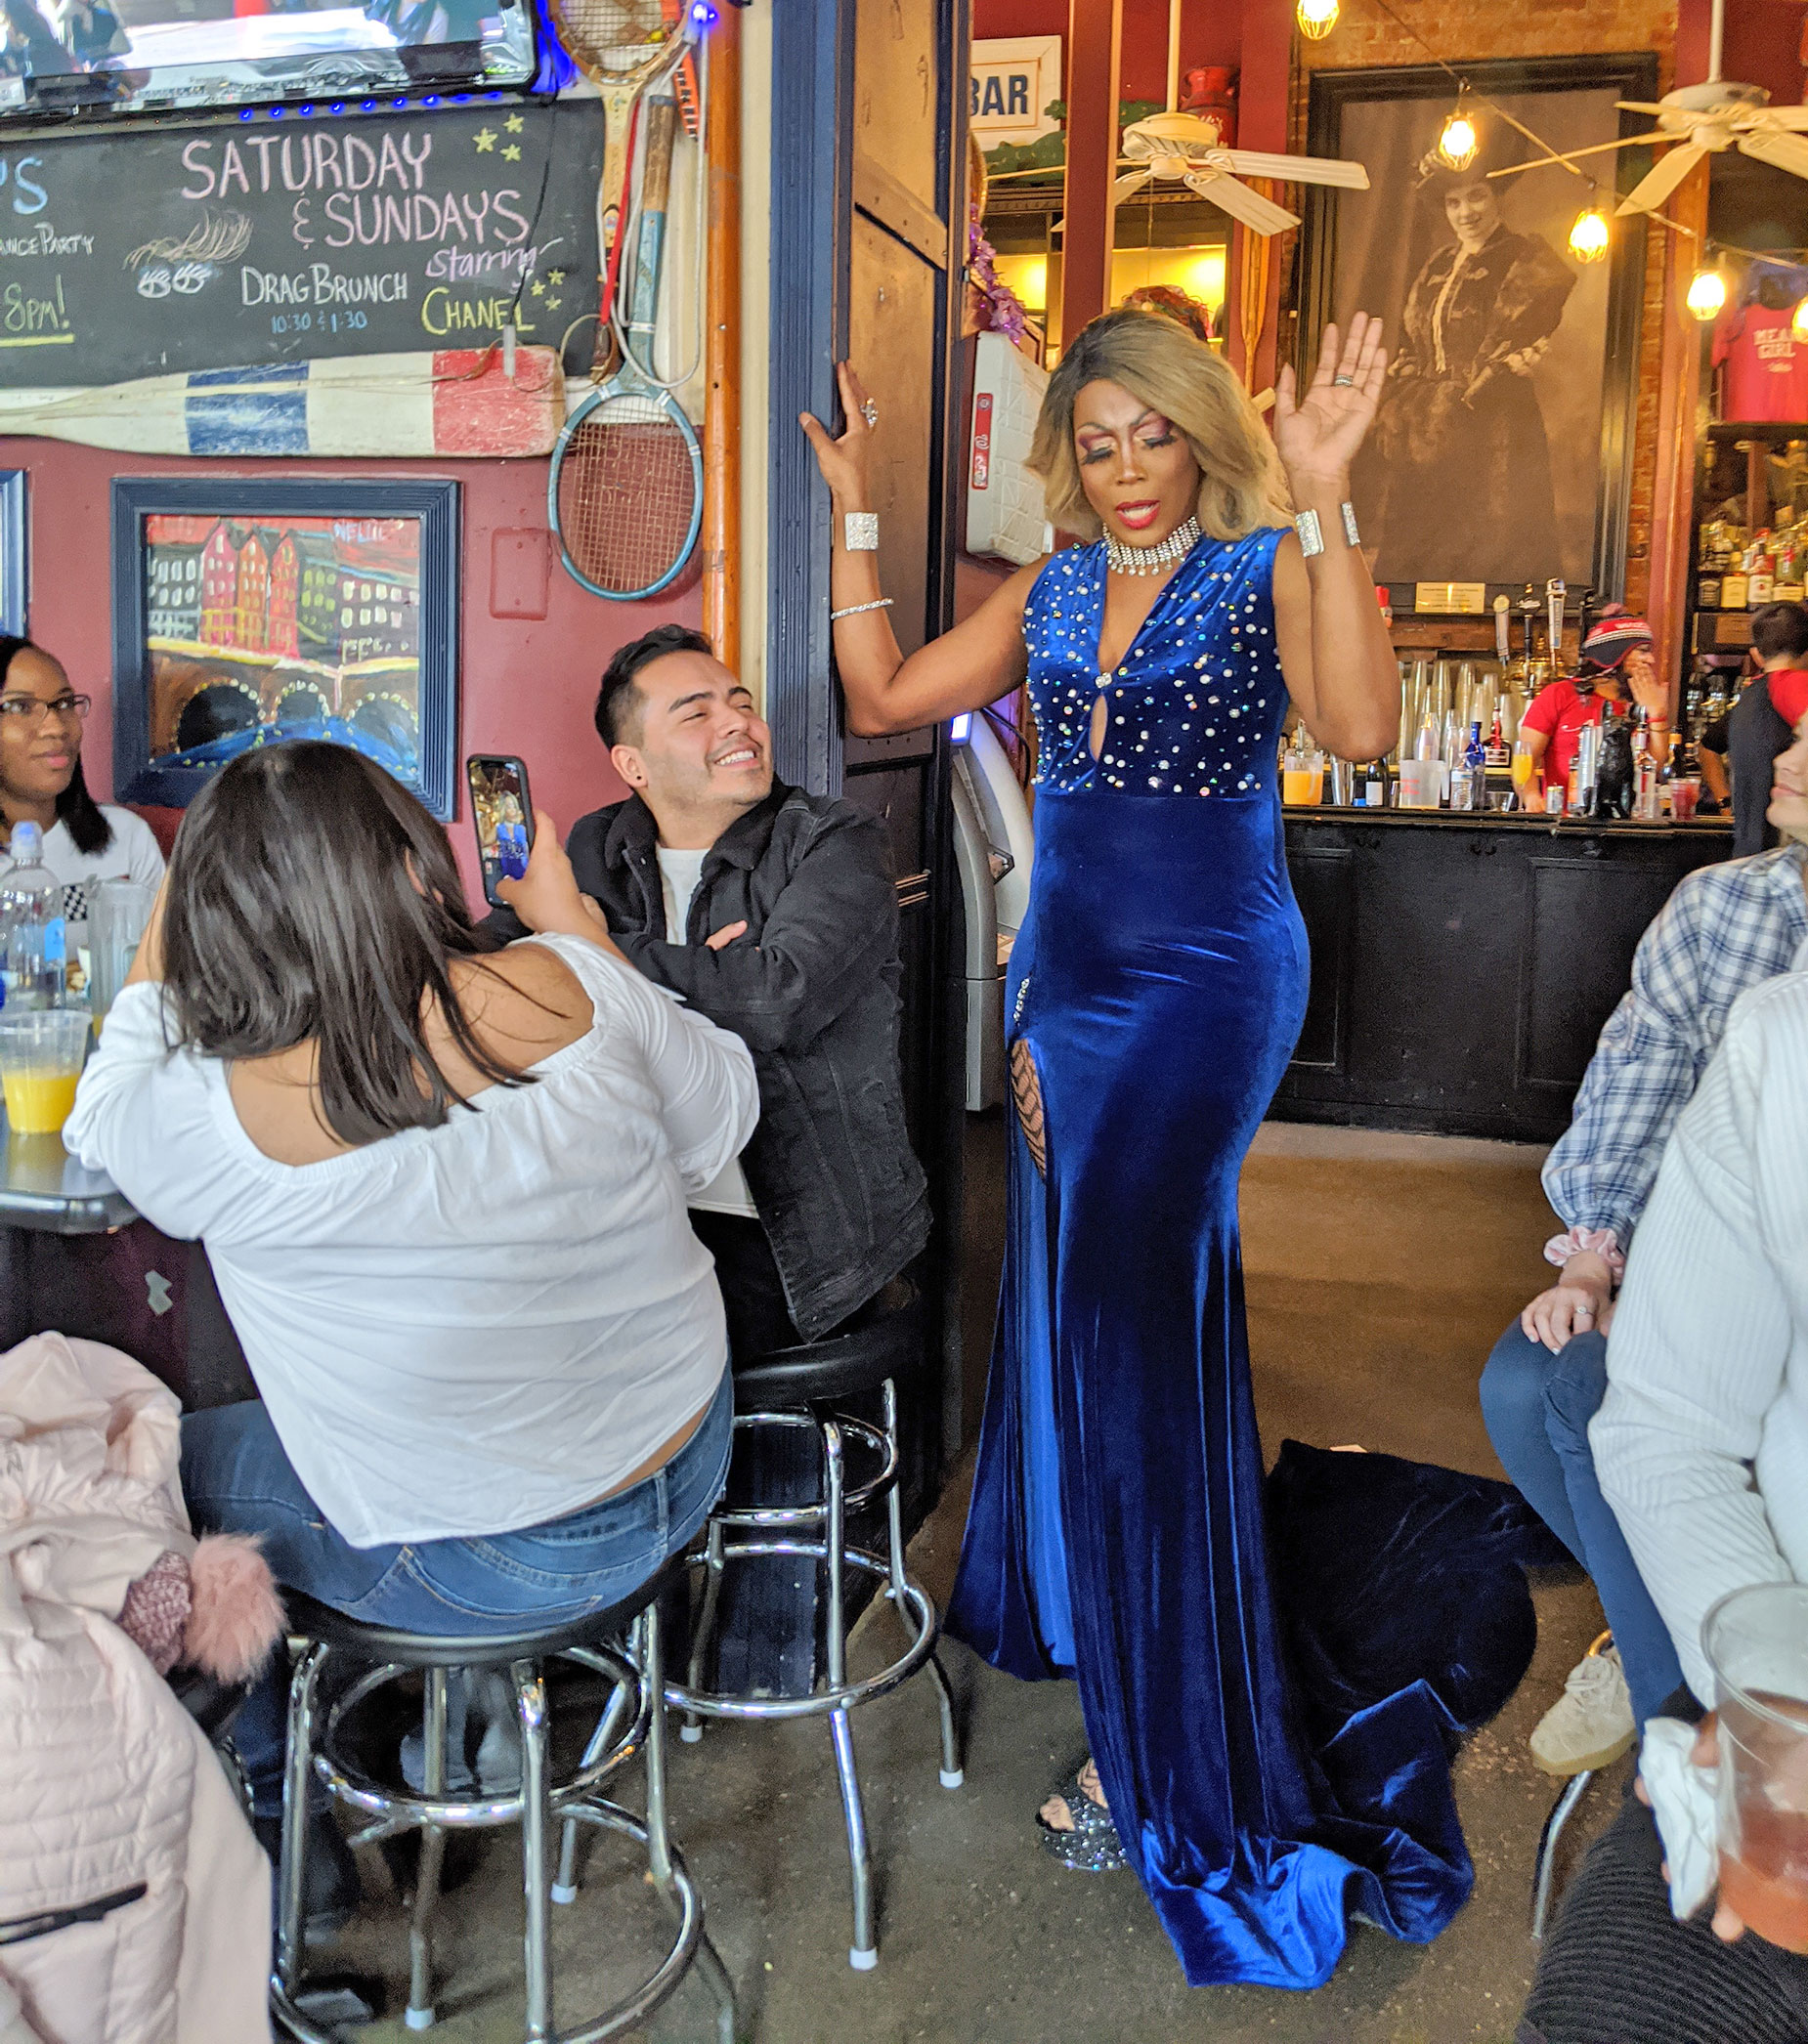 Drag queen Sapphire Ardwick Ardmore-Blue performing at Nellies Brunch.